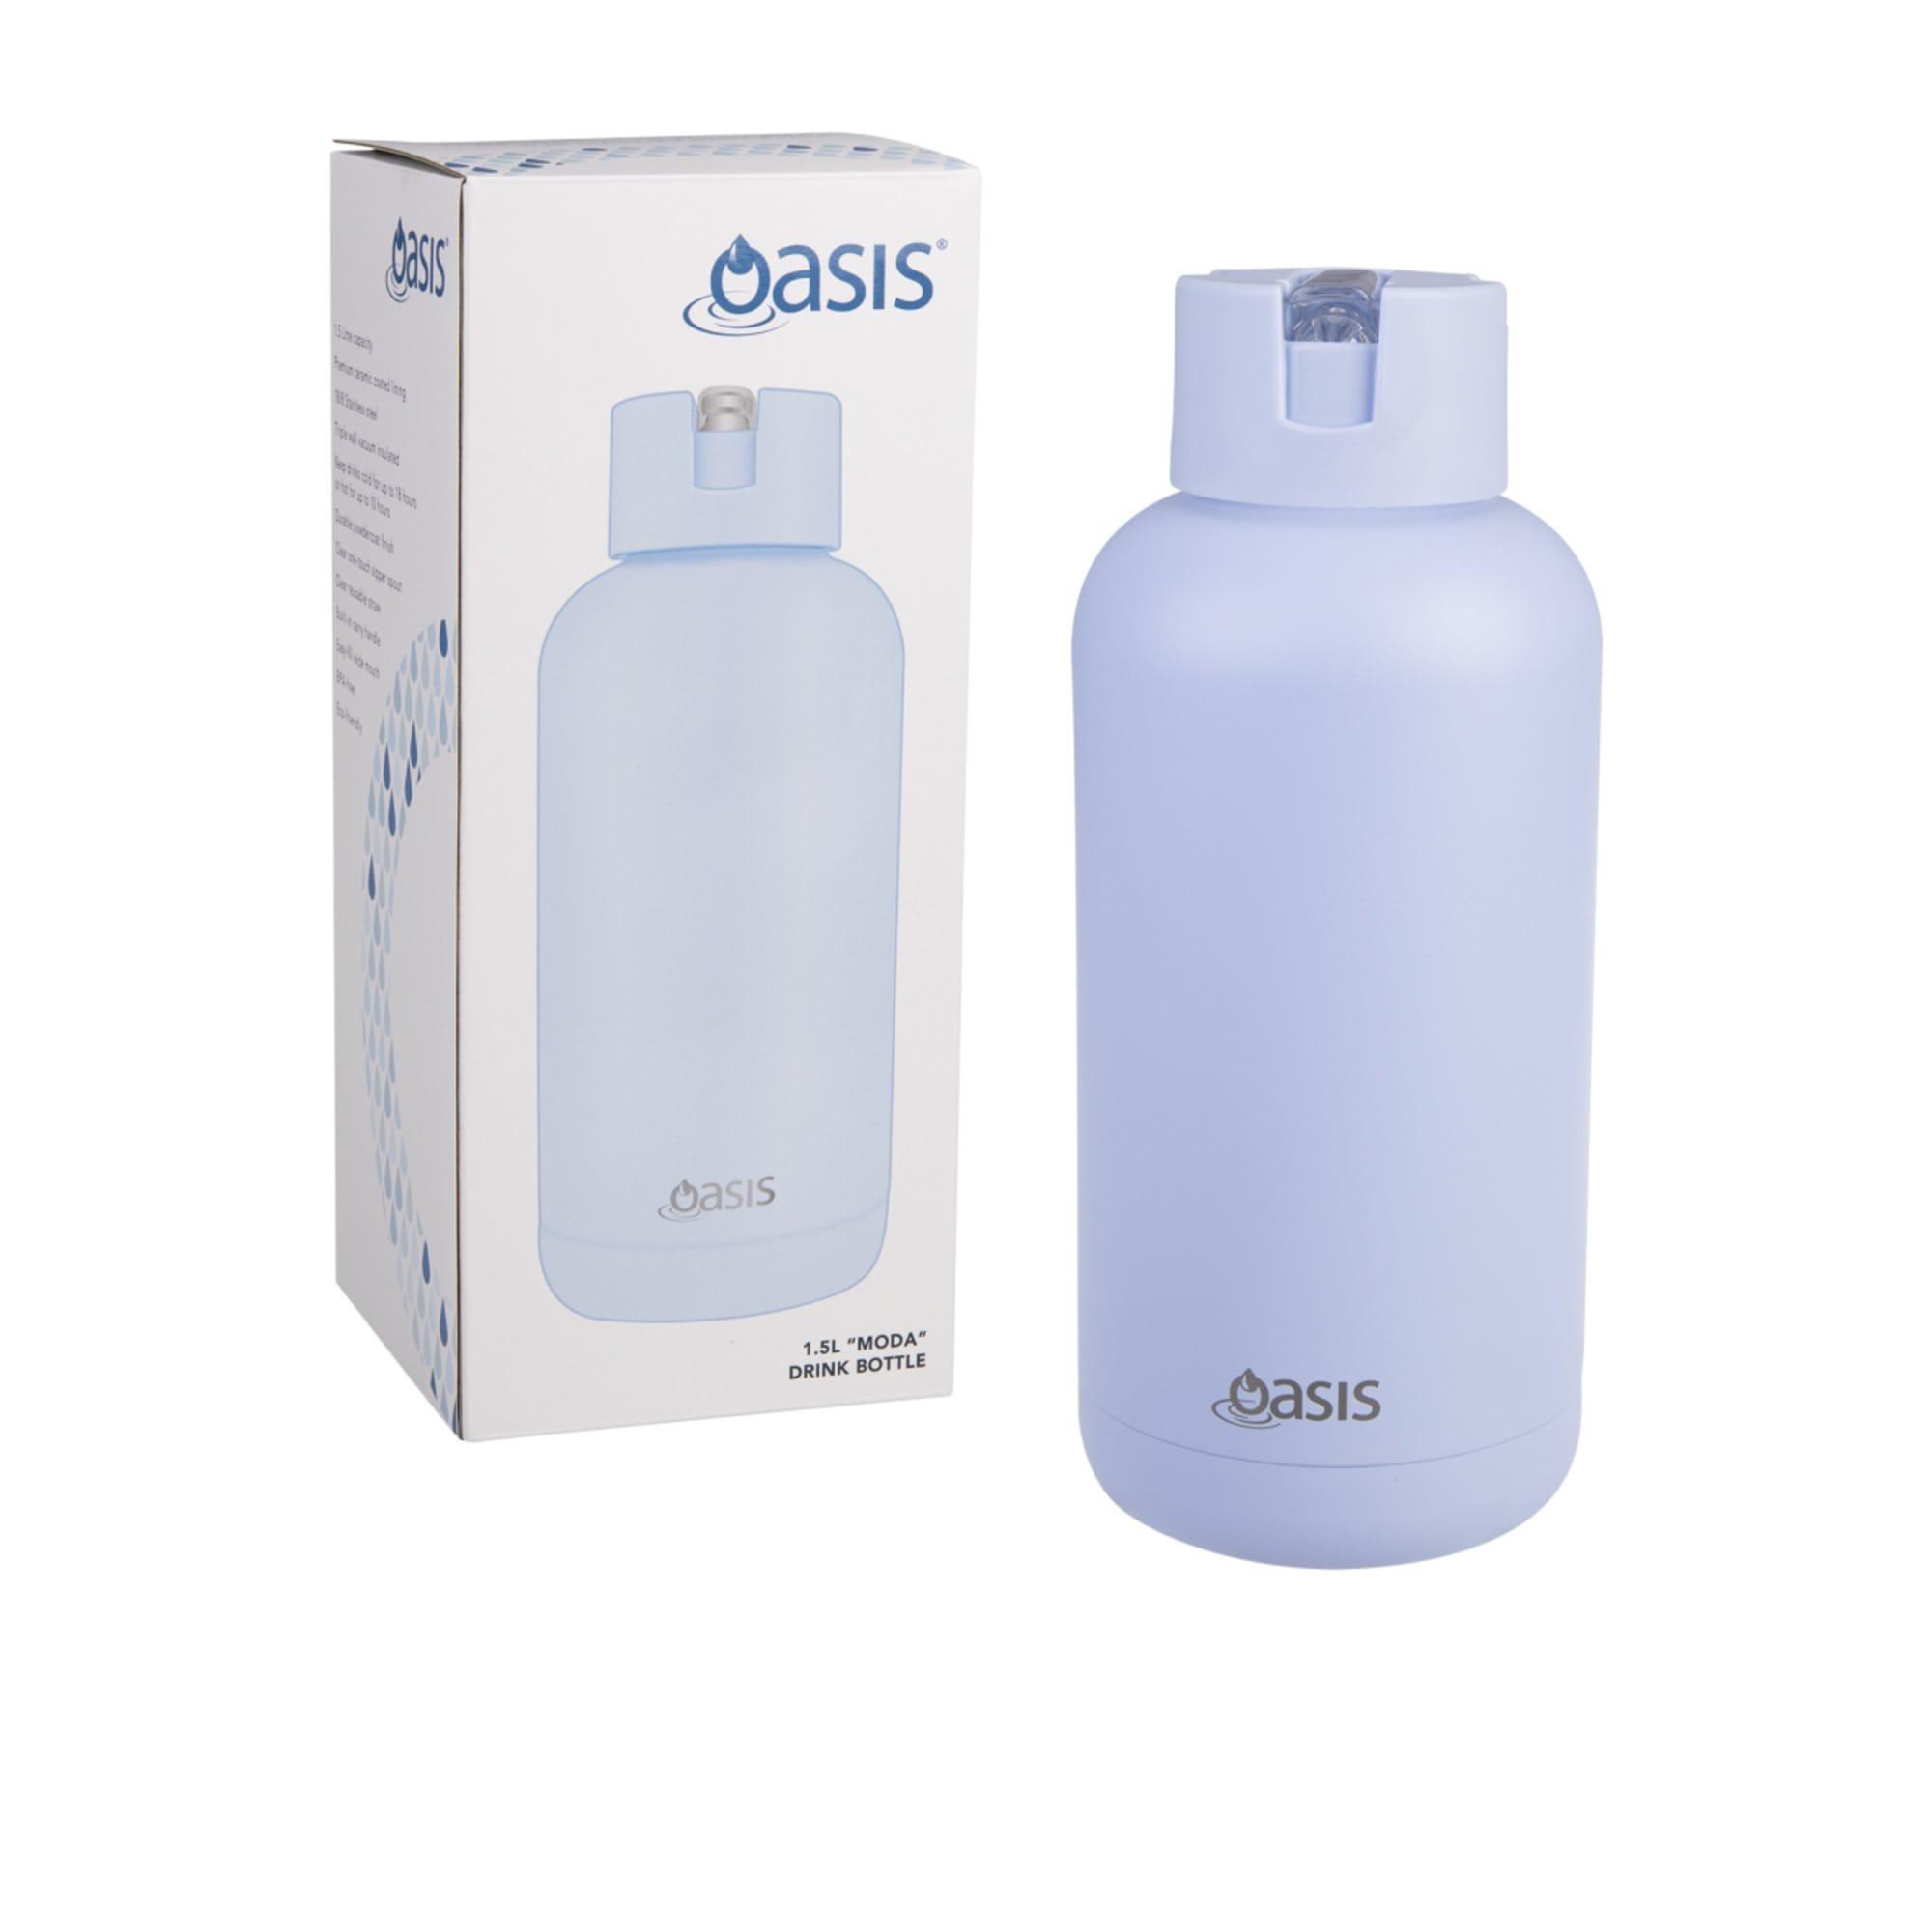 Oasis Moda Triple Wall Insulated Drink Bottle 1.5L Periwinkle Image 11